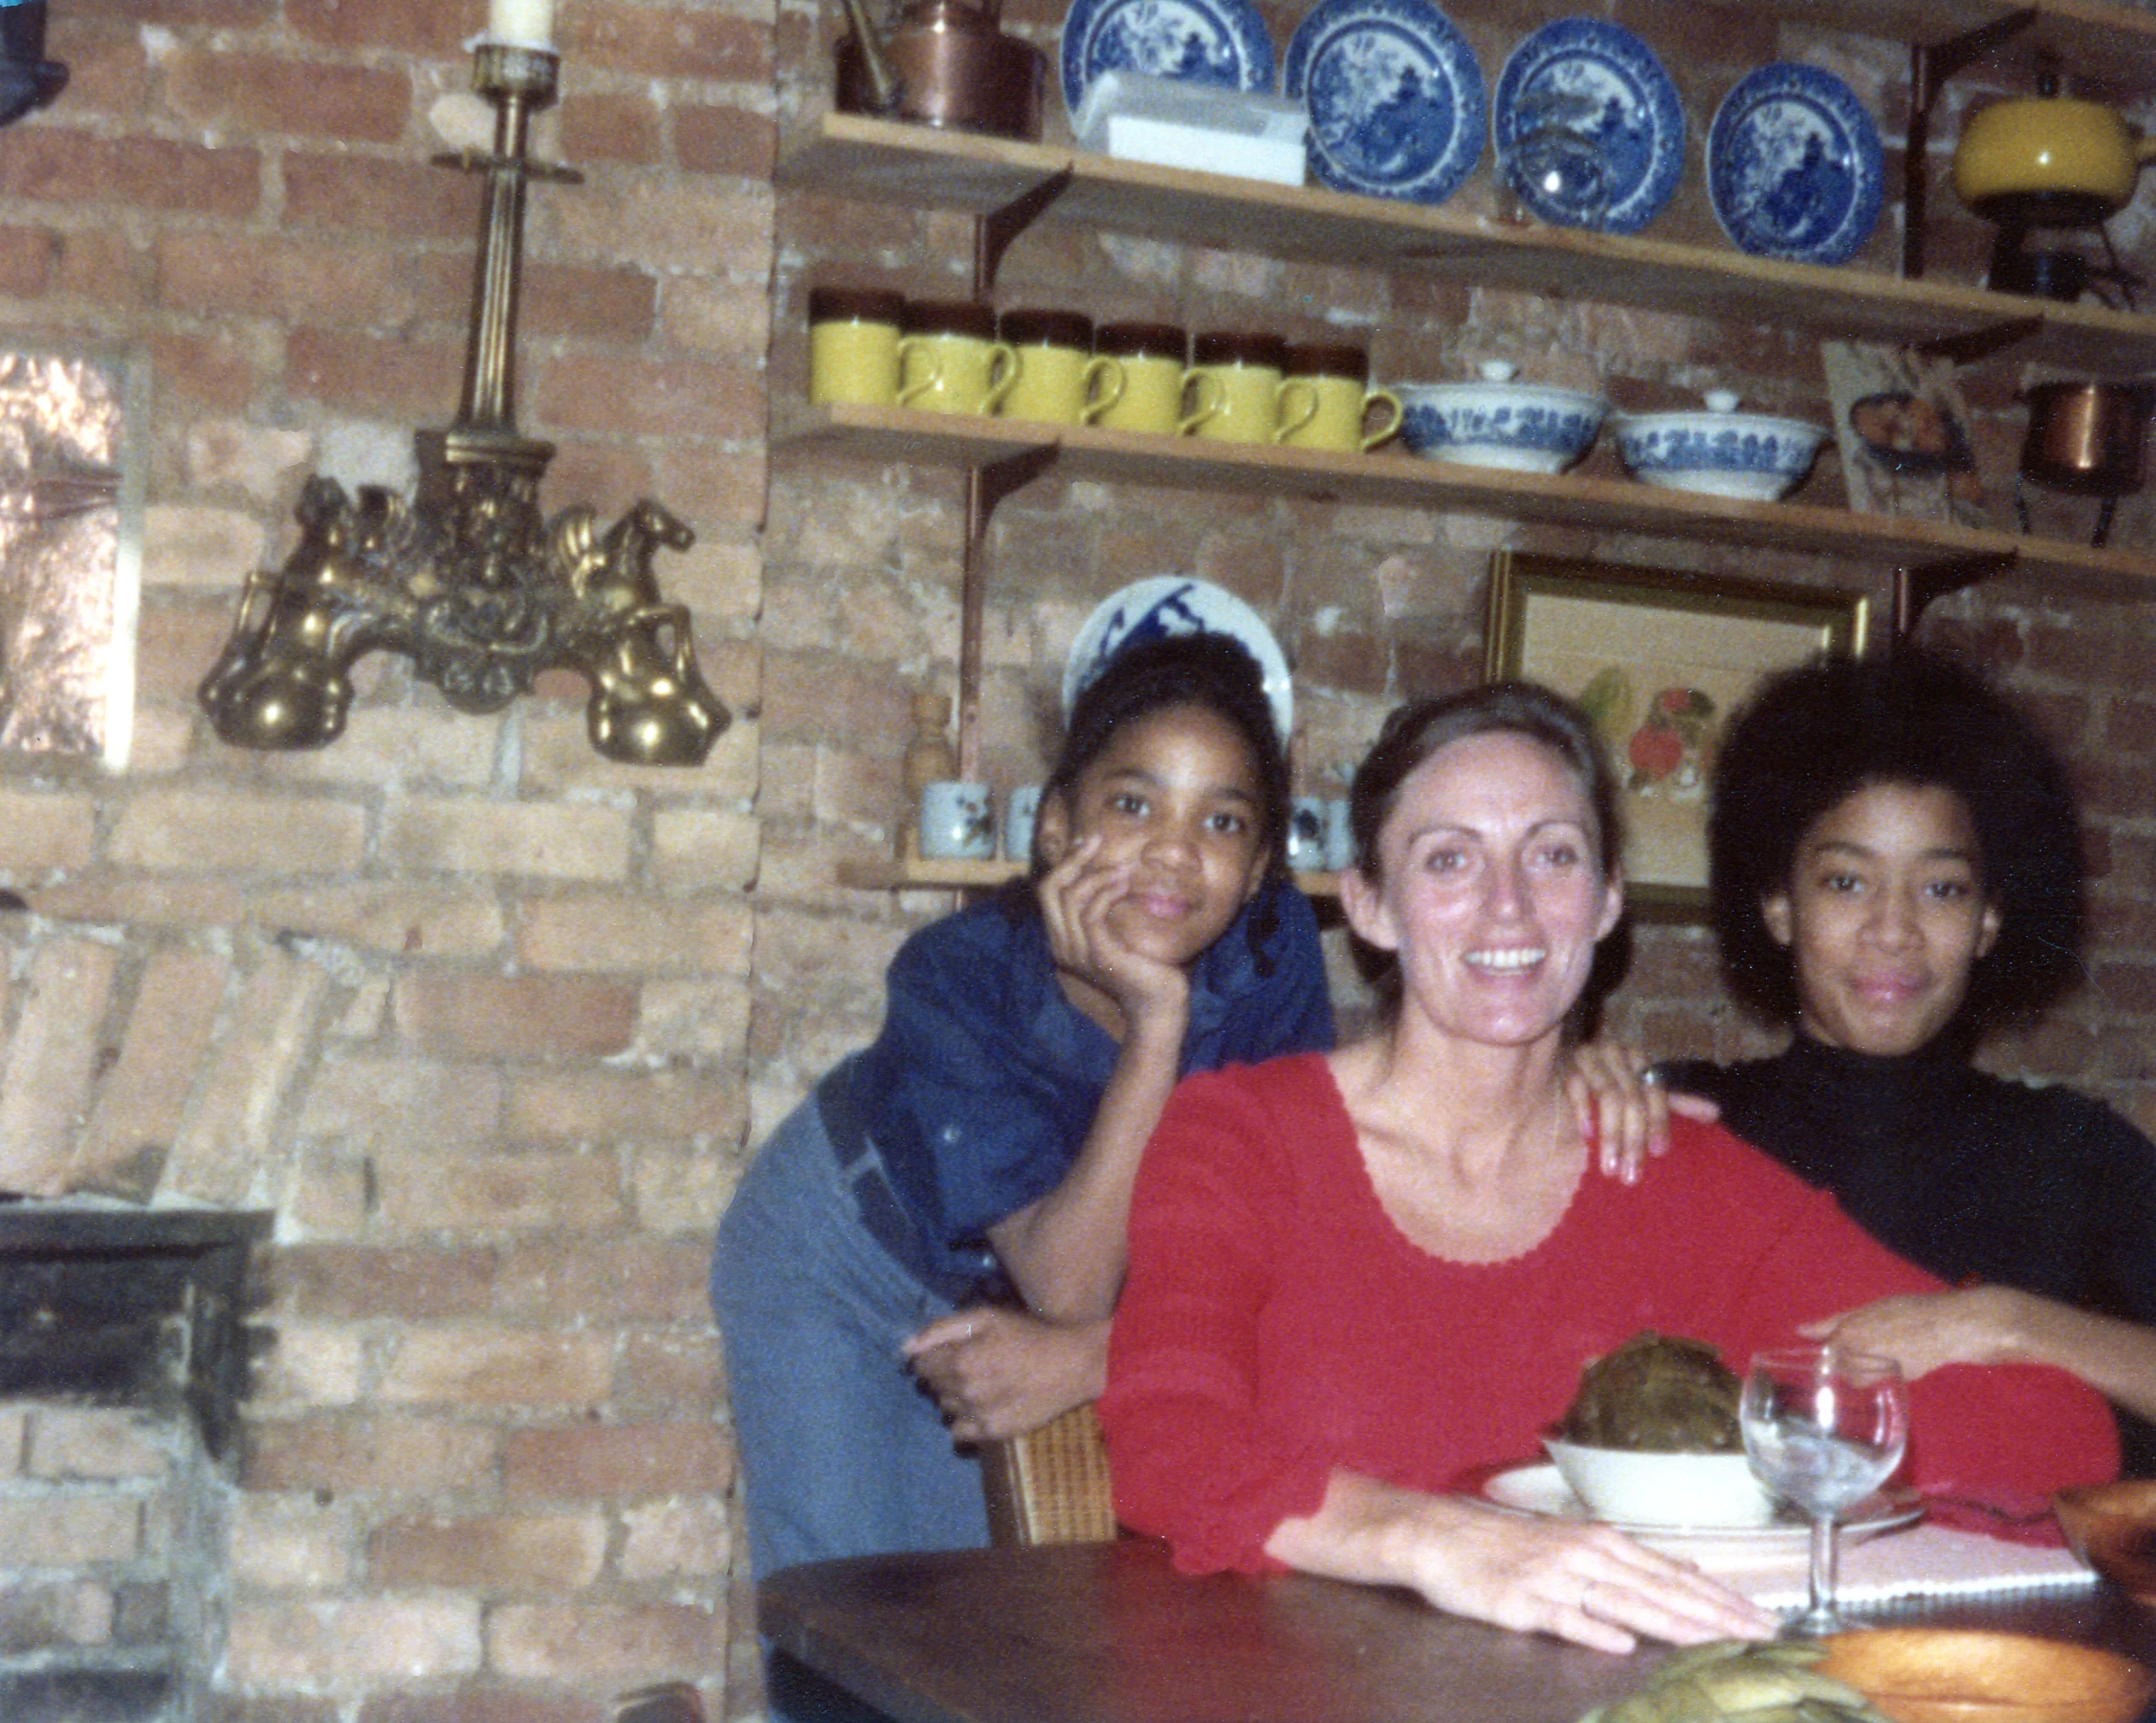 In 1977, Nora Fitzpatrick joined the Basquiat family as Gerard’s partner © The Estate of Jean-Michel Basquiat